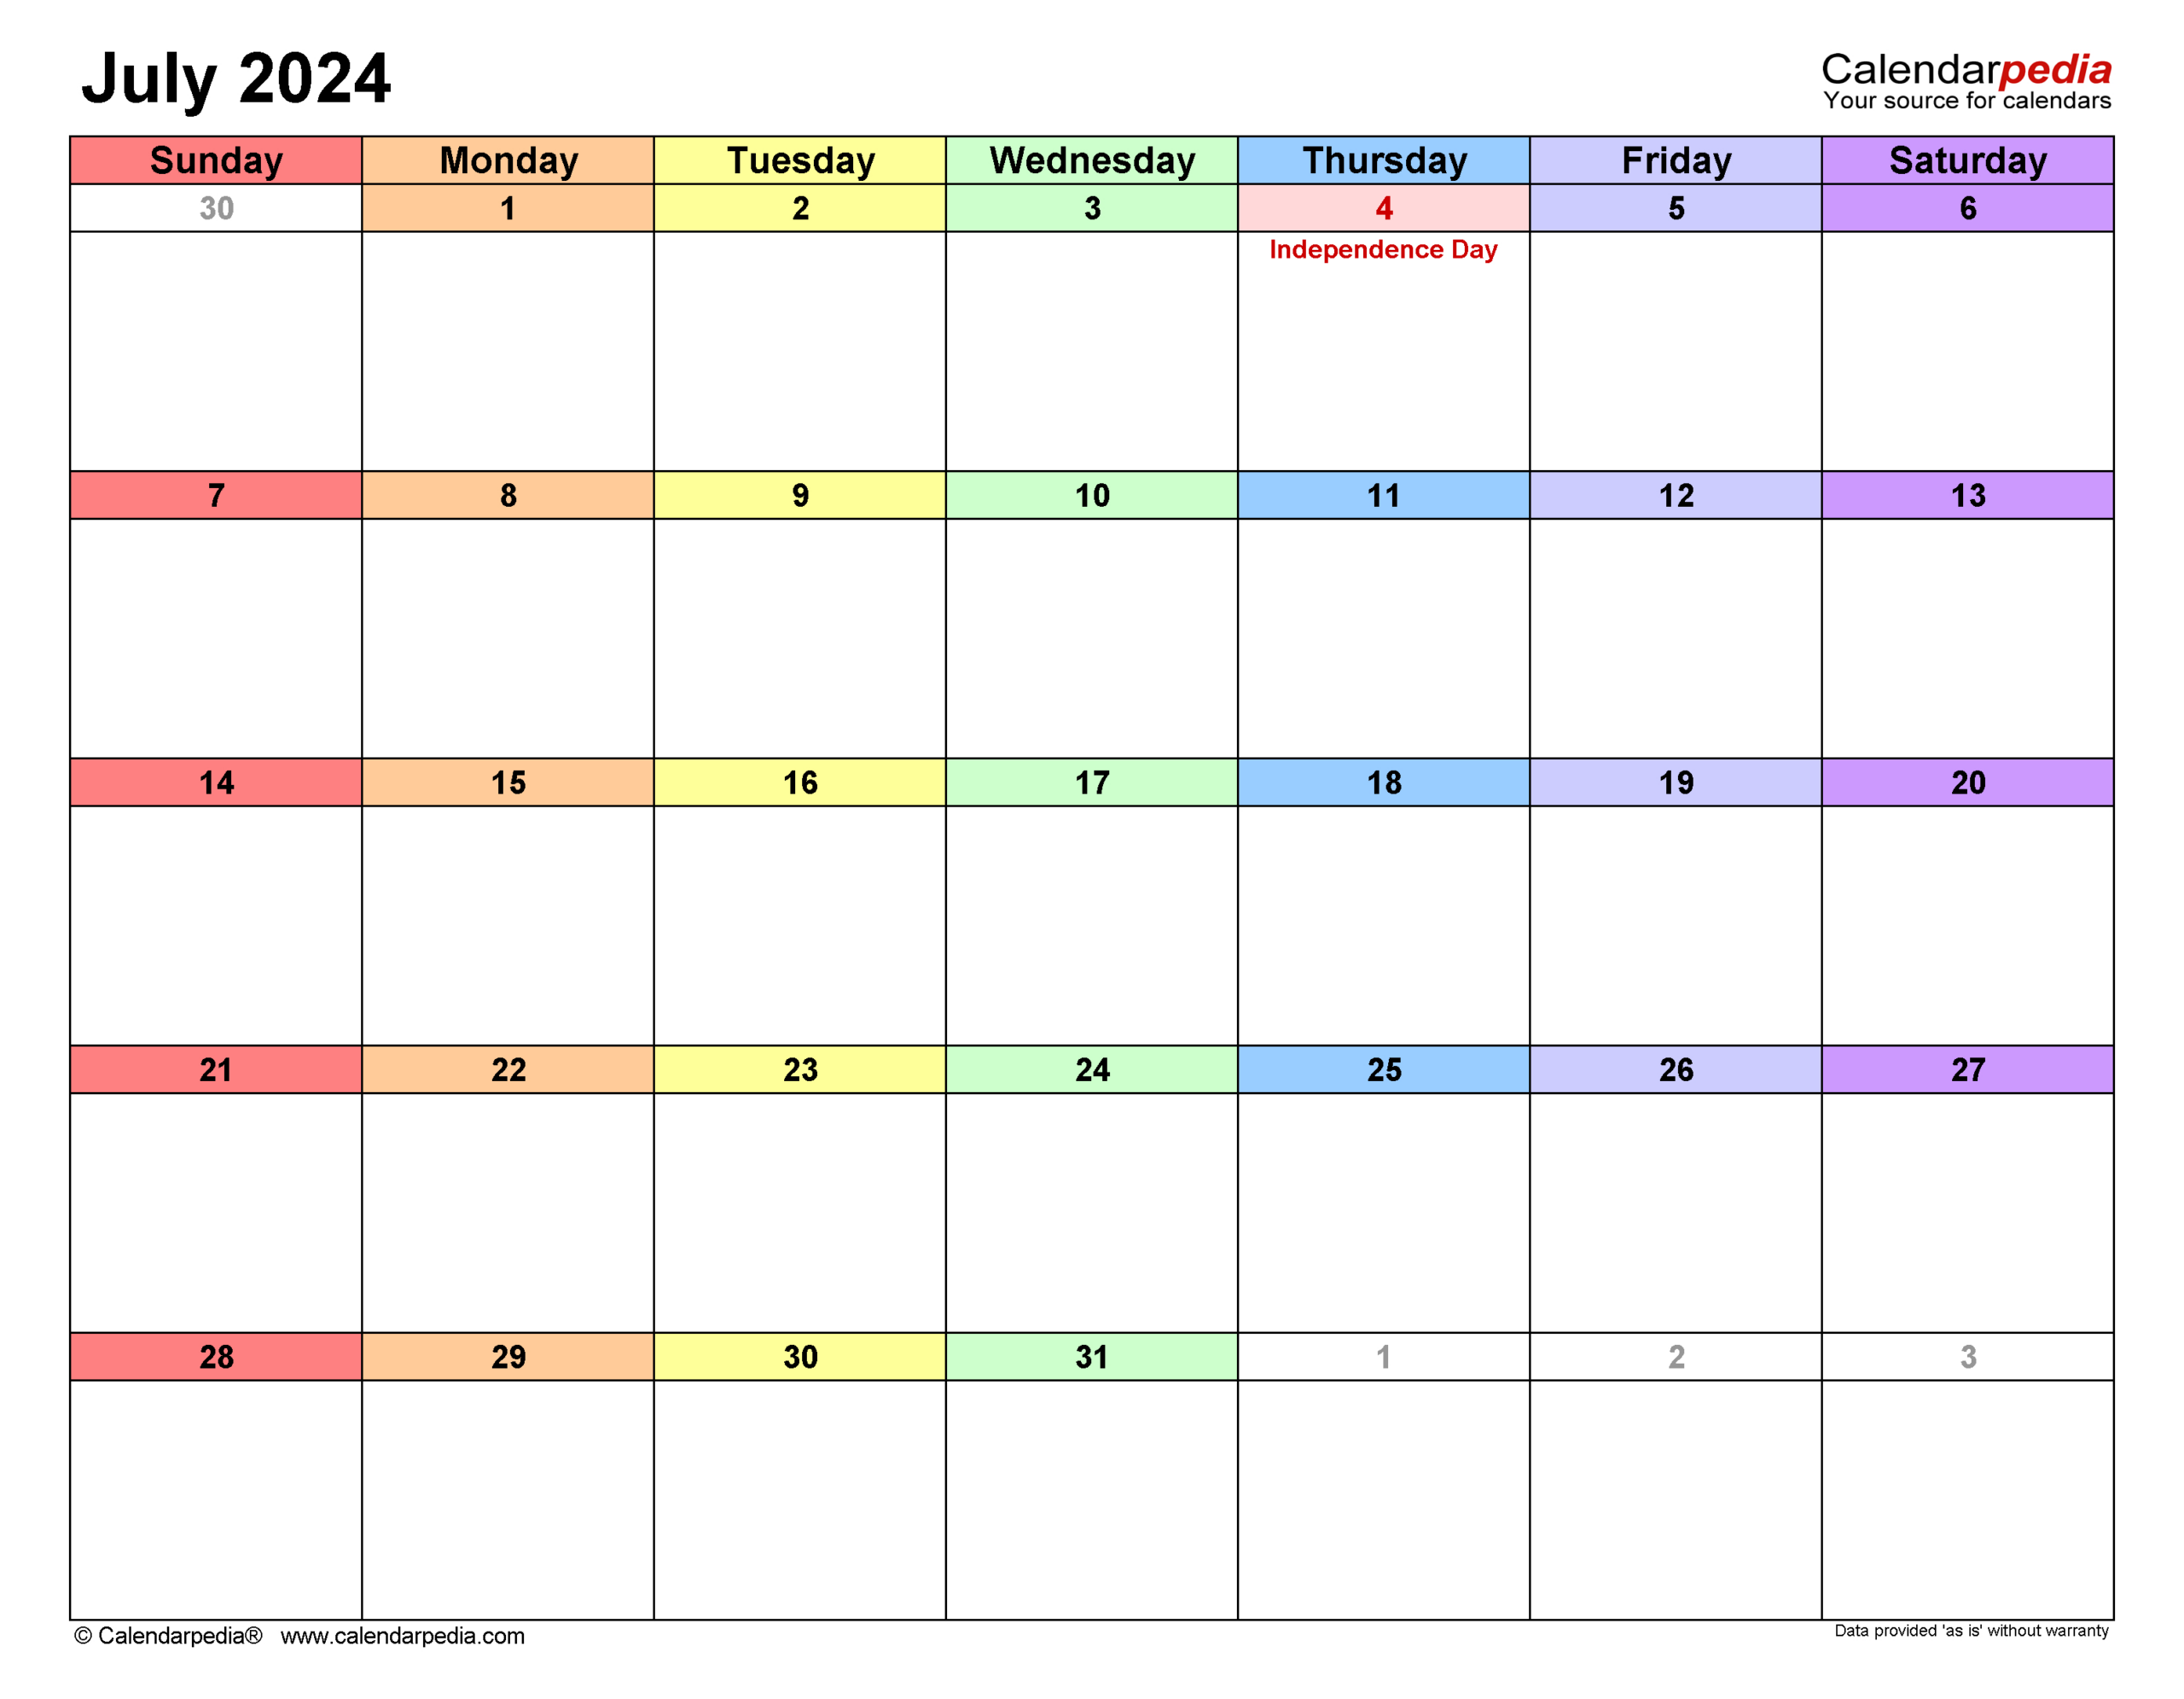 July 2024 Calendar | Templates For Word, Excel And Pdf throughout Blank July 2024 Calendar Editable